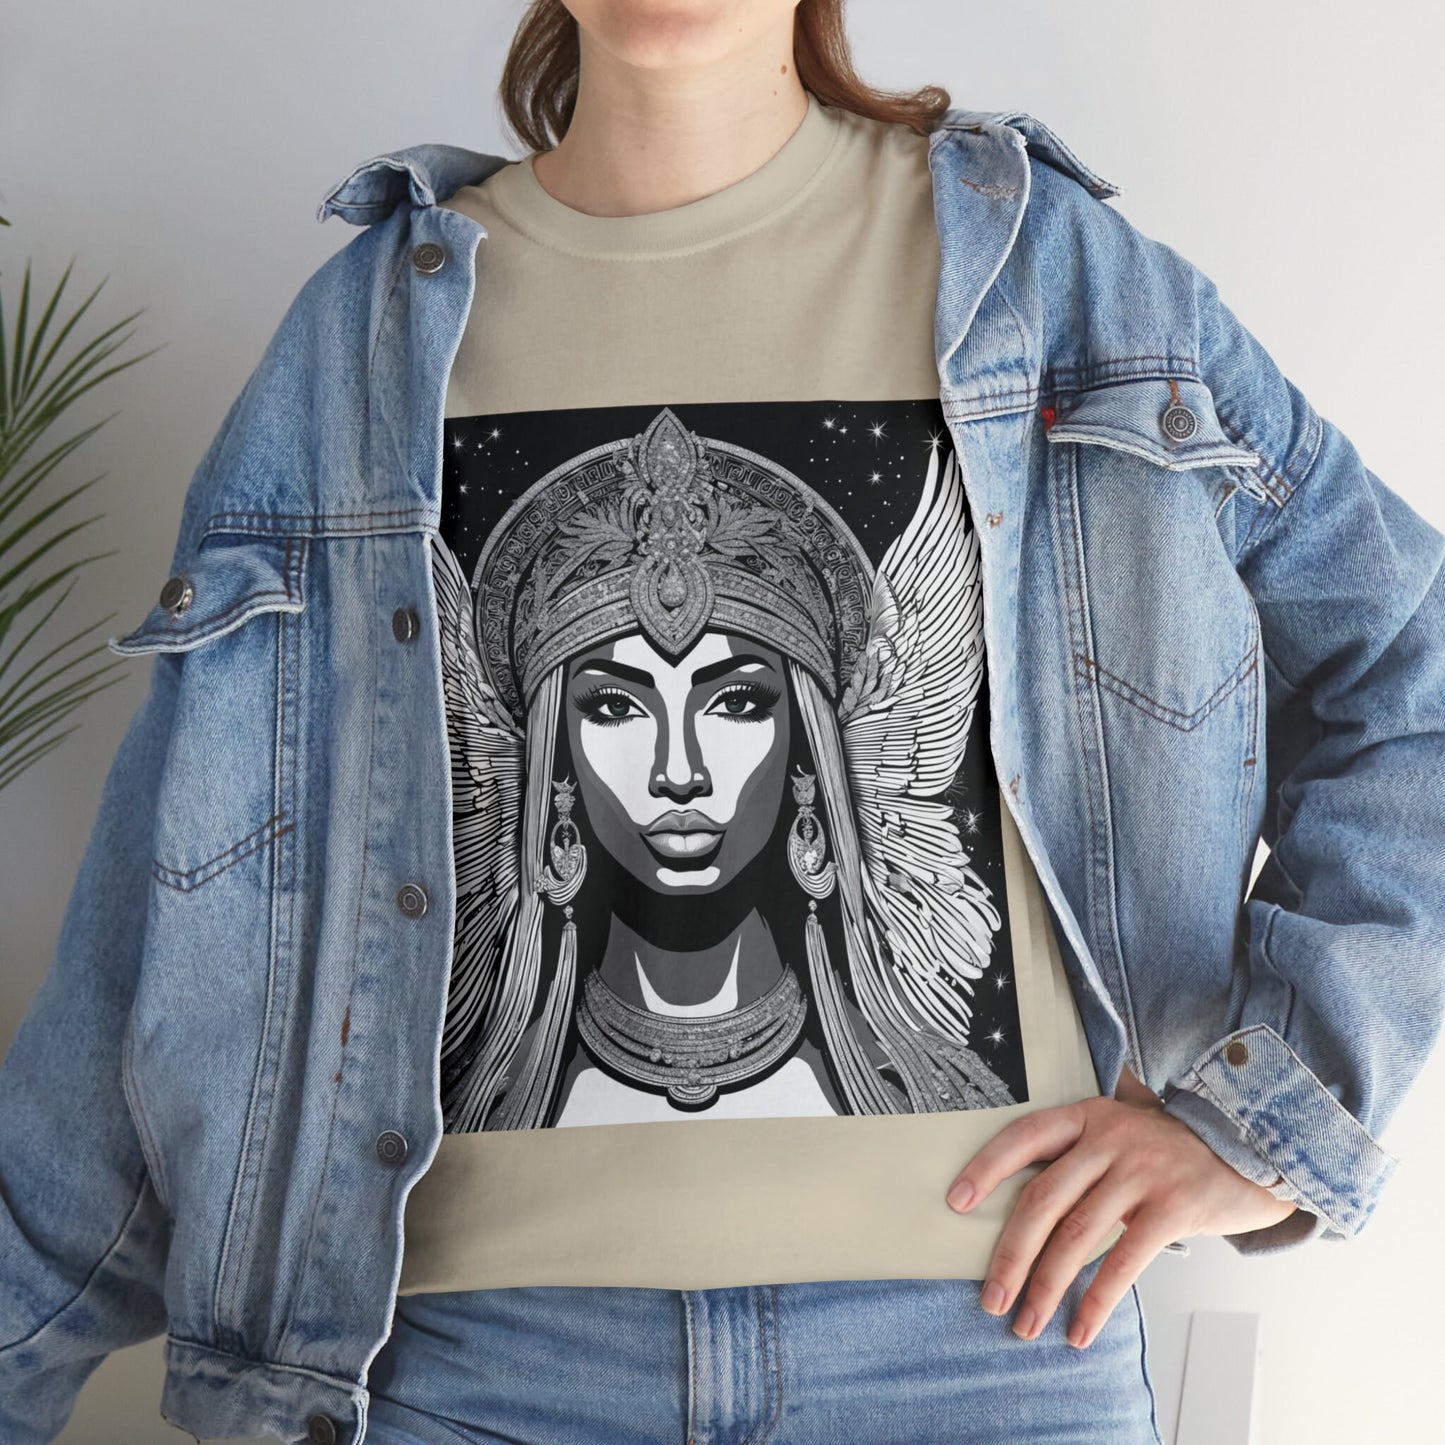 Nicki T-Shirt For Concert Baddie Women/Men Perfect for Christmas and Birthday Gift